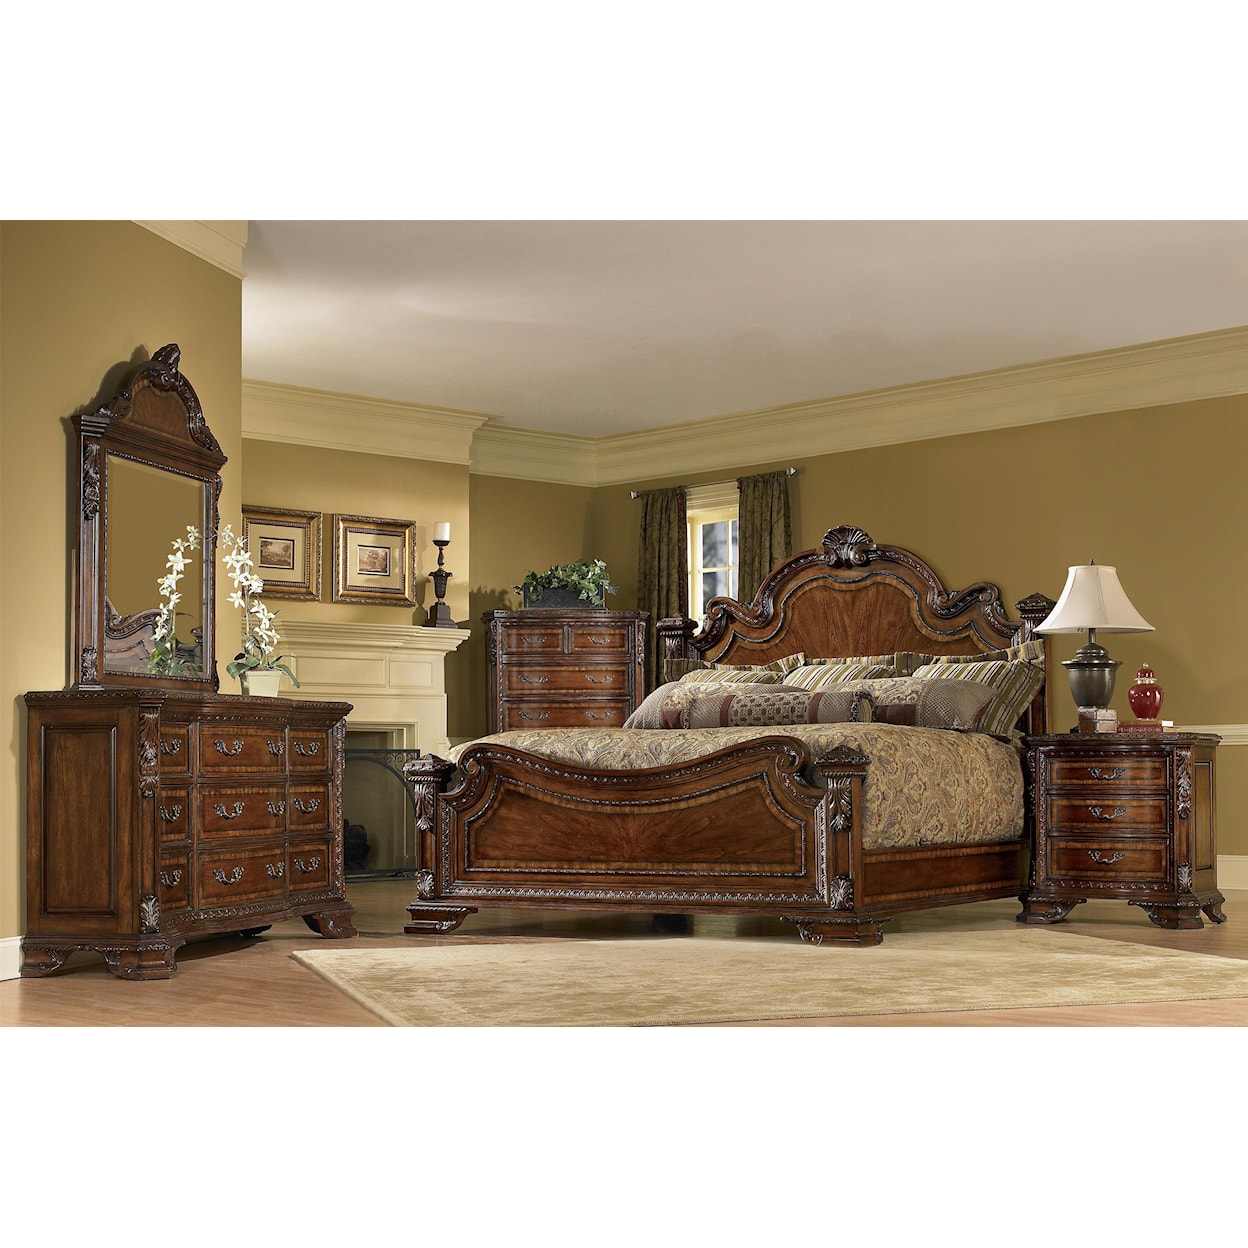 A.R.T. Furniture Inc Annabelle California King Bedroom Group